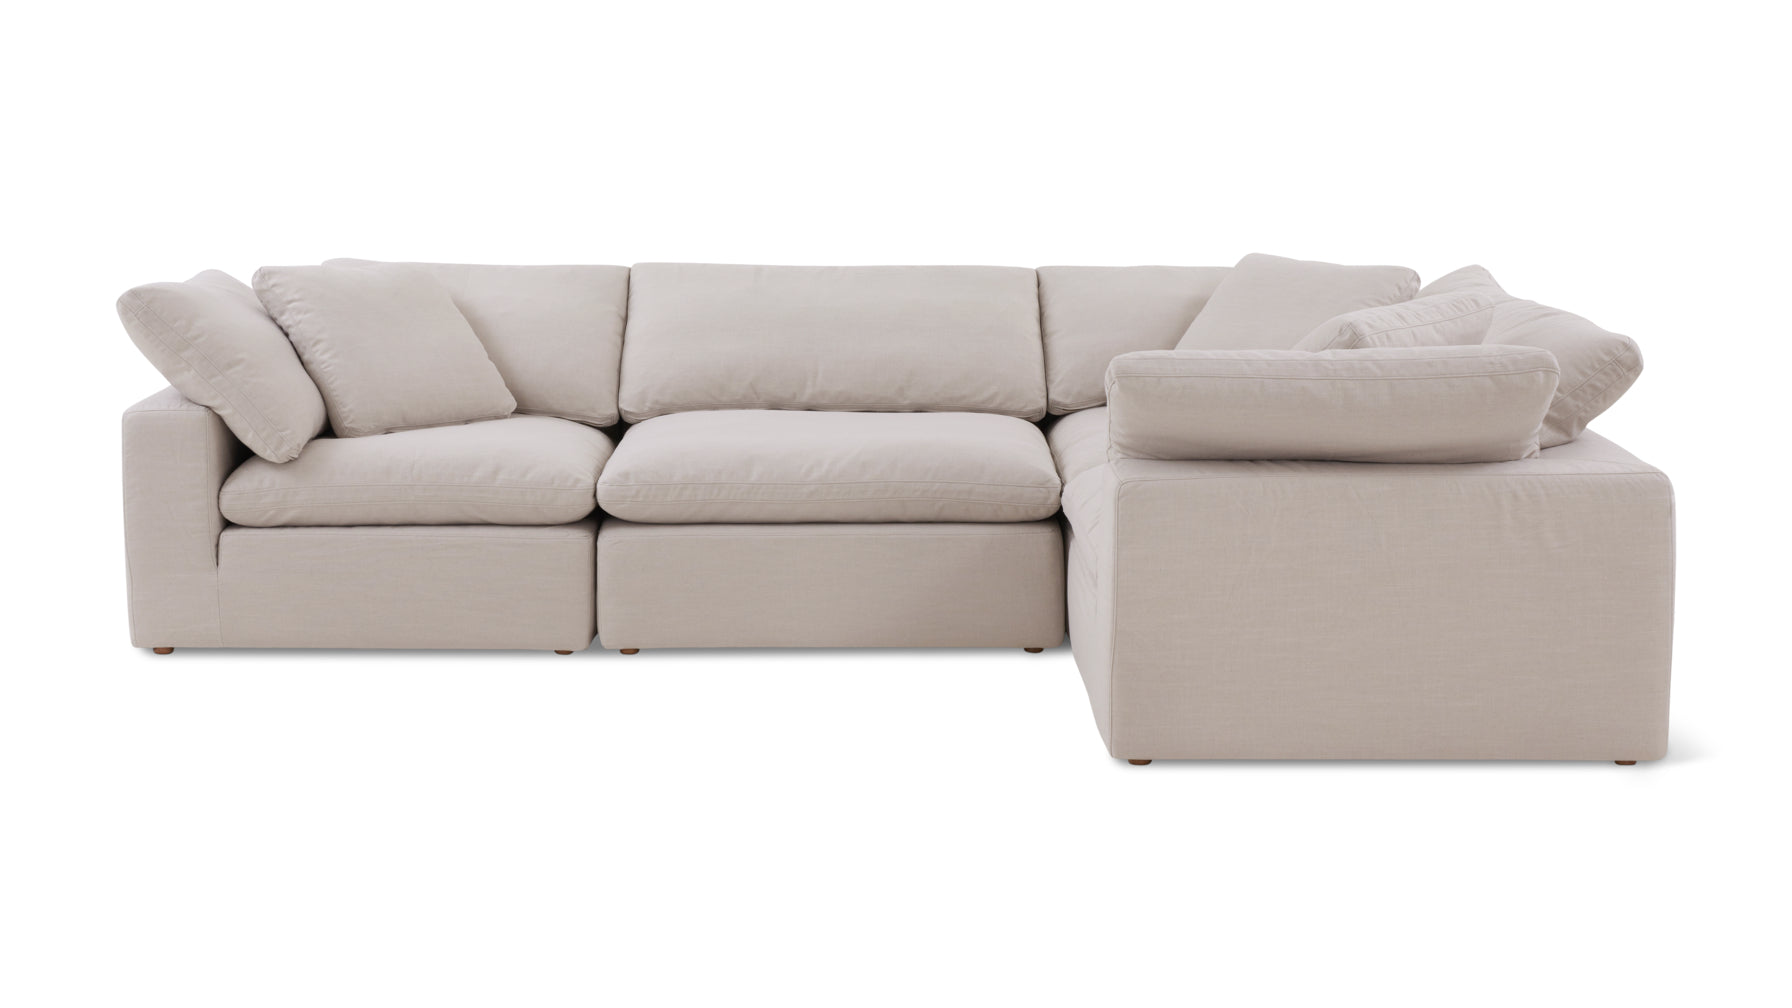 Movie Night™ 4-Piece Modular Sectional Closed, Large, Clay - Image 1